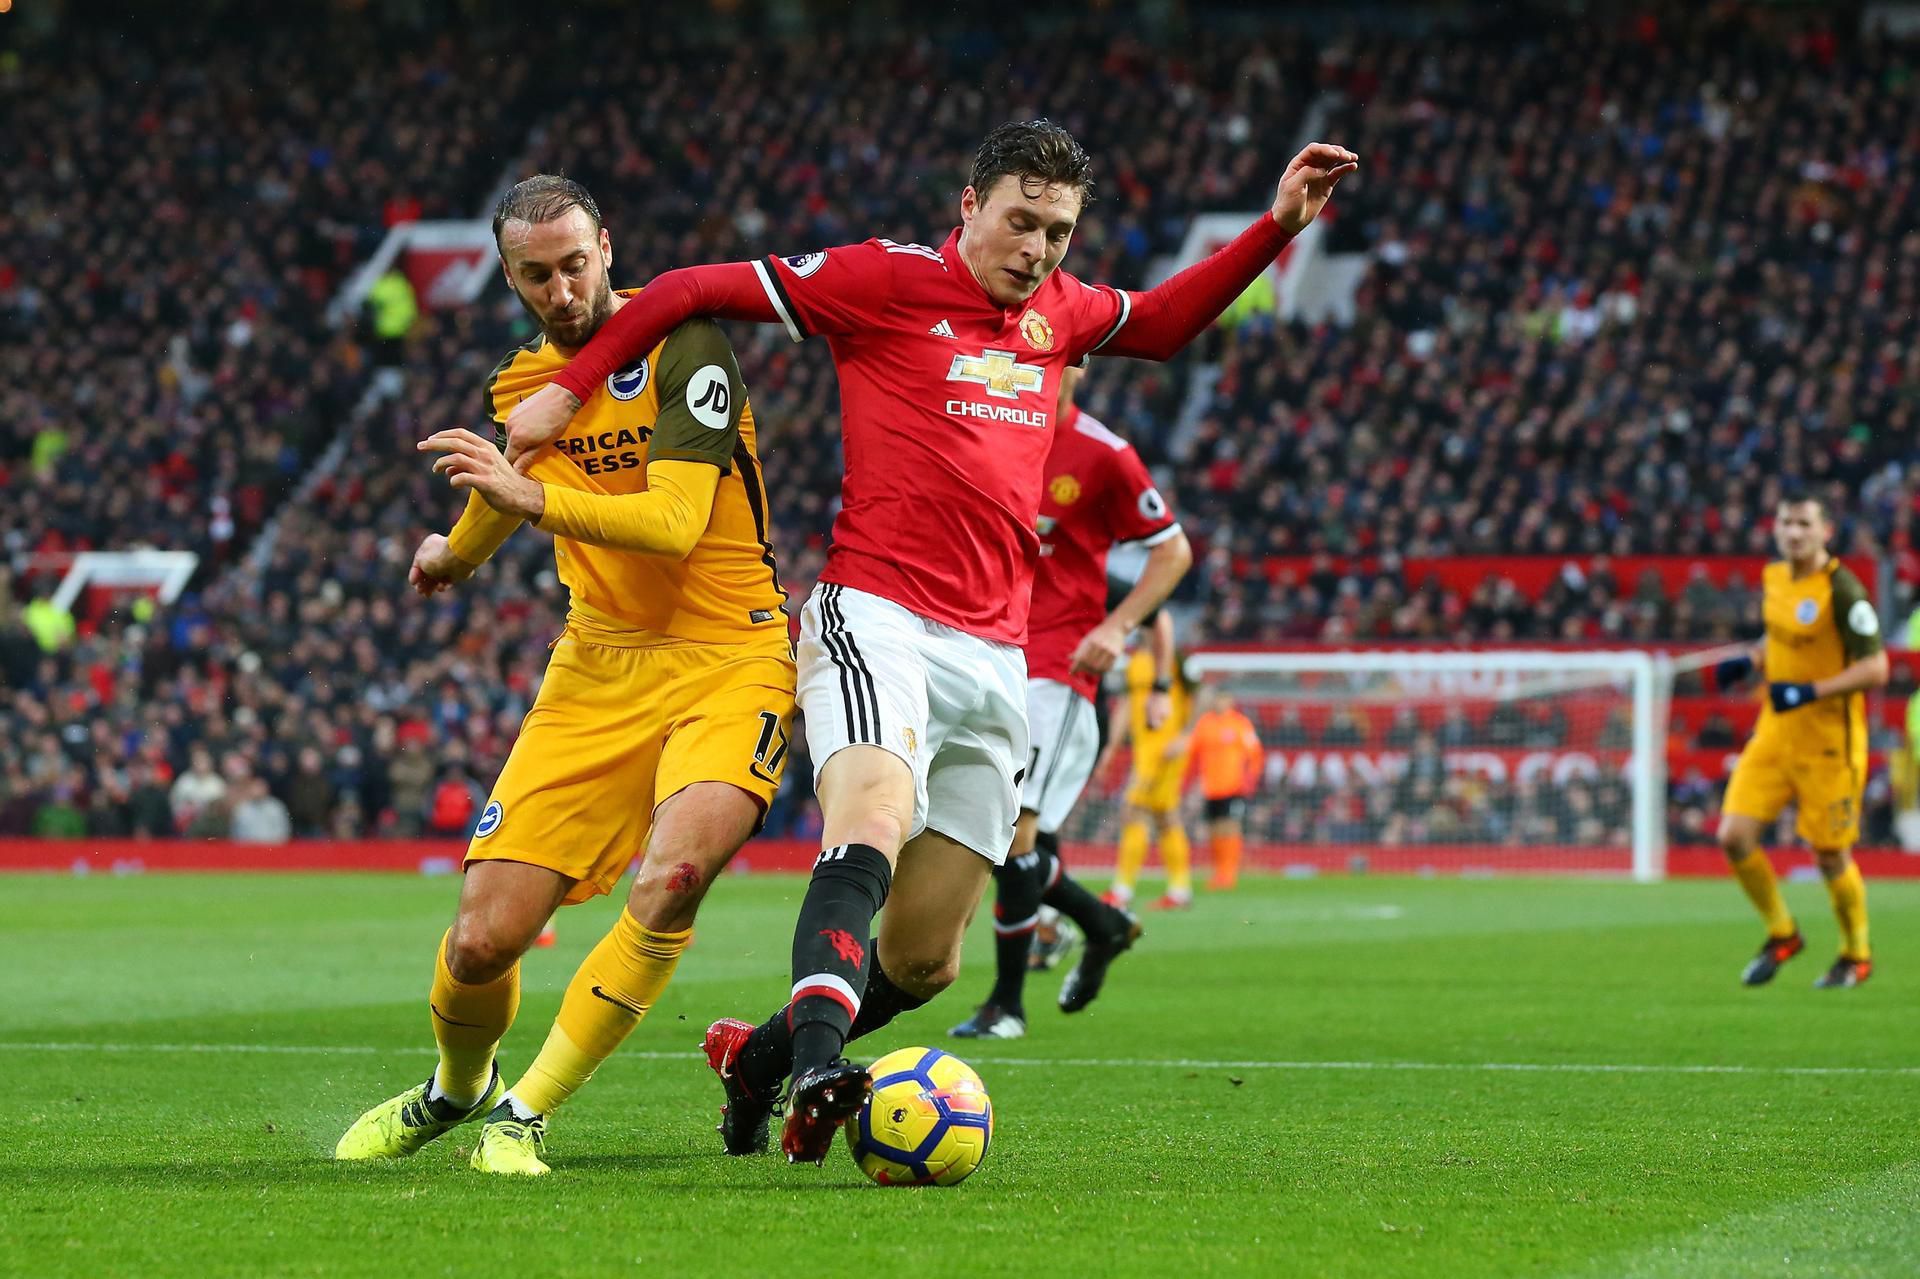 After a shaky start Victor Lindelof growing in stature at the heart of Manchester United's defence